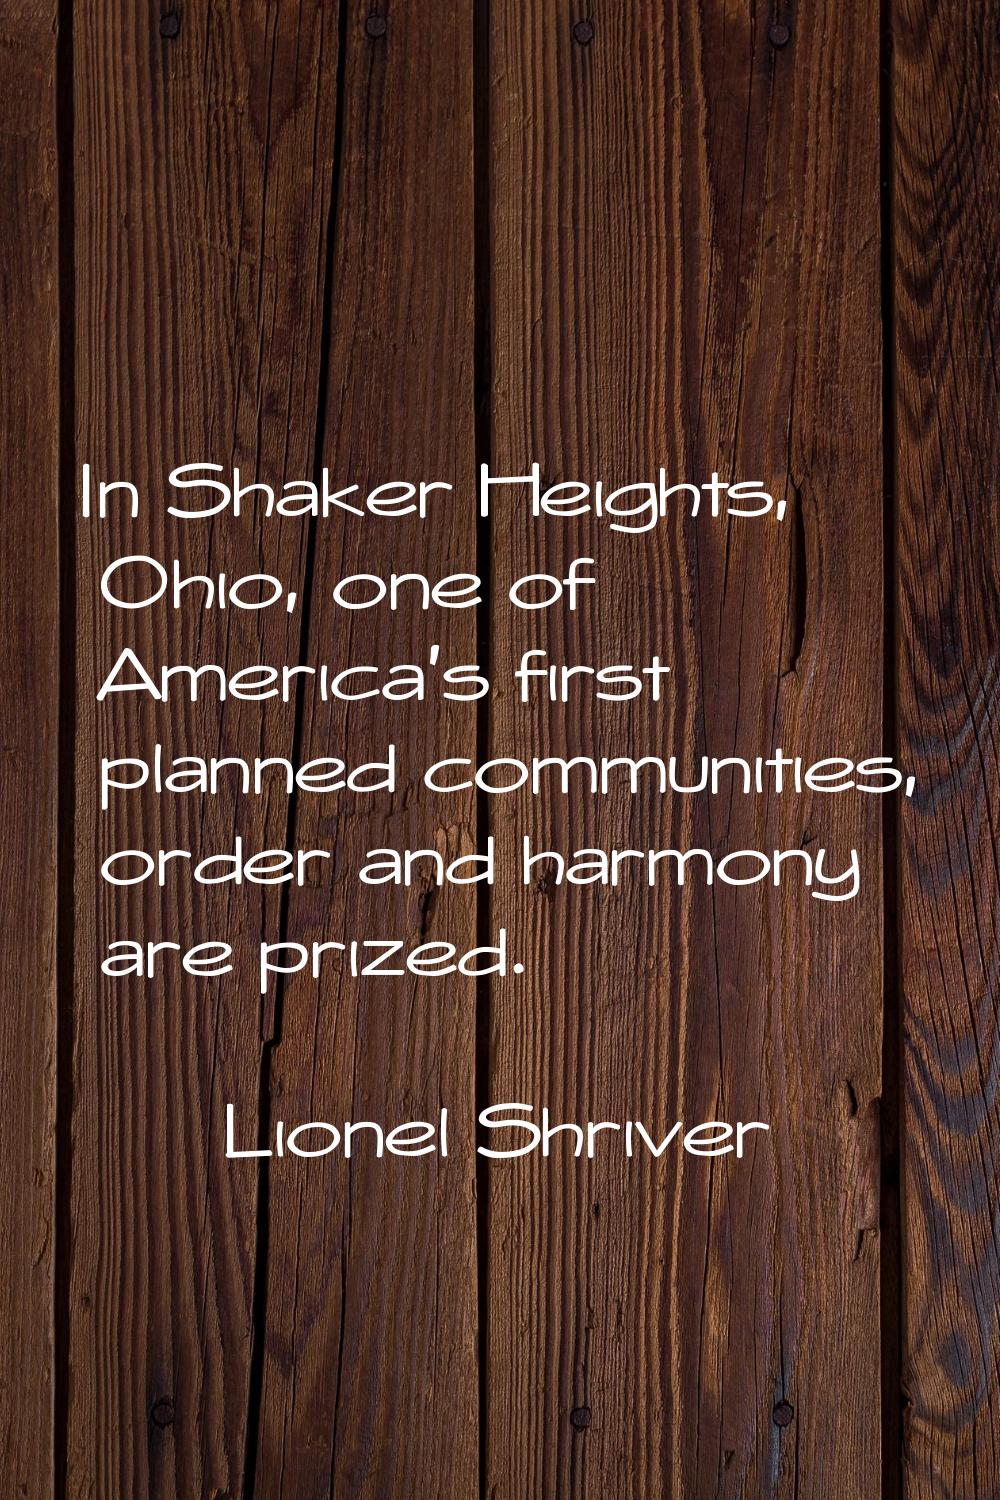 In Shaker Heights, Ohio, one of America's first planned communities, order and harmony are prized.